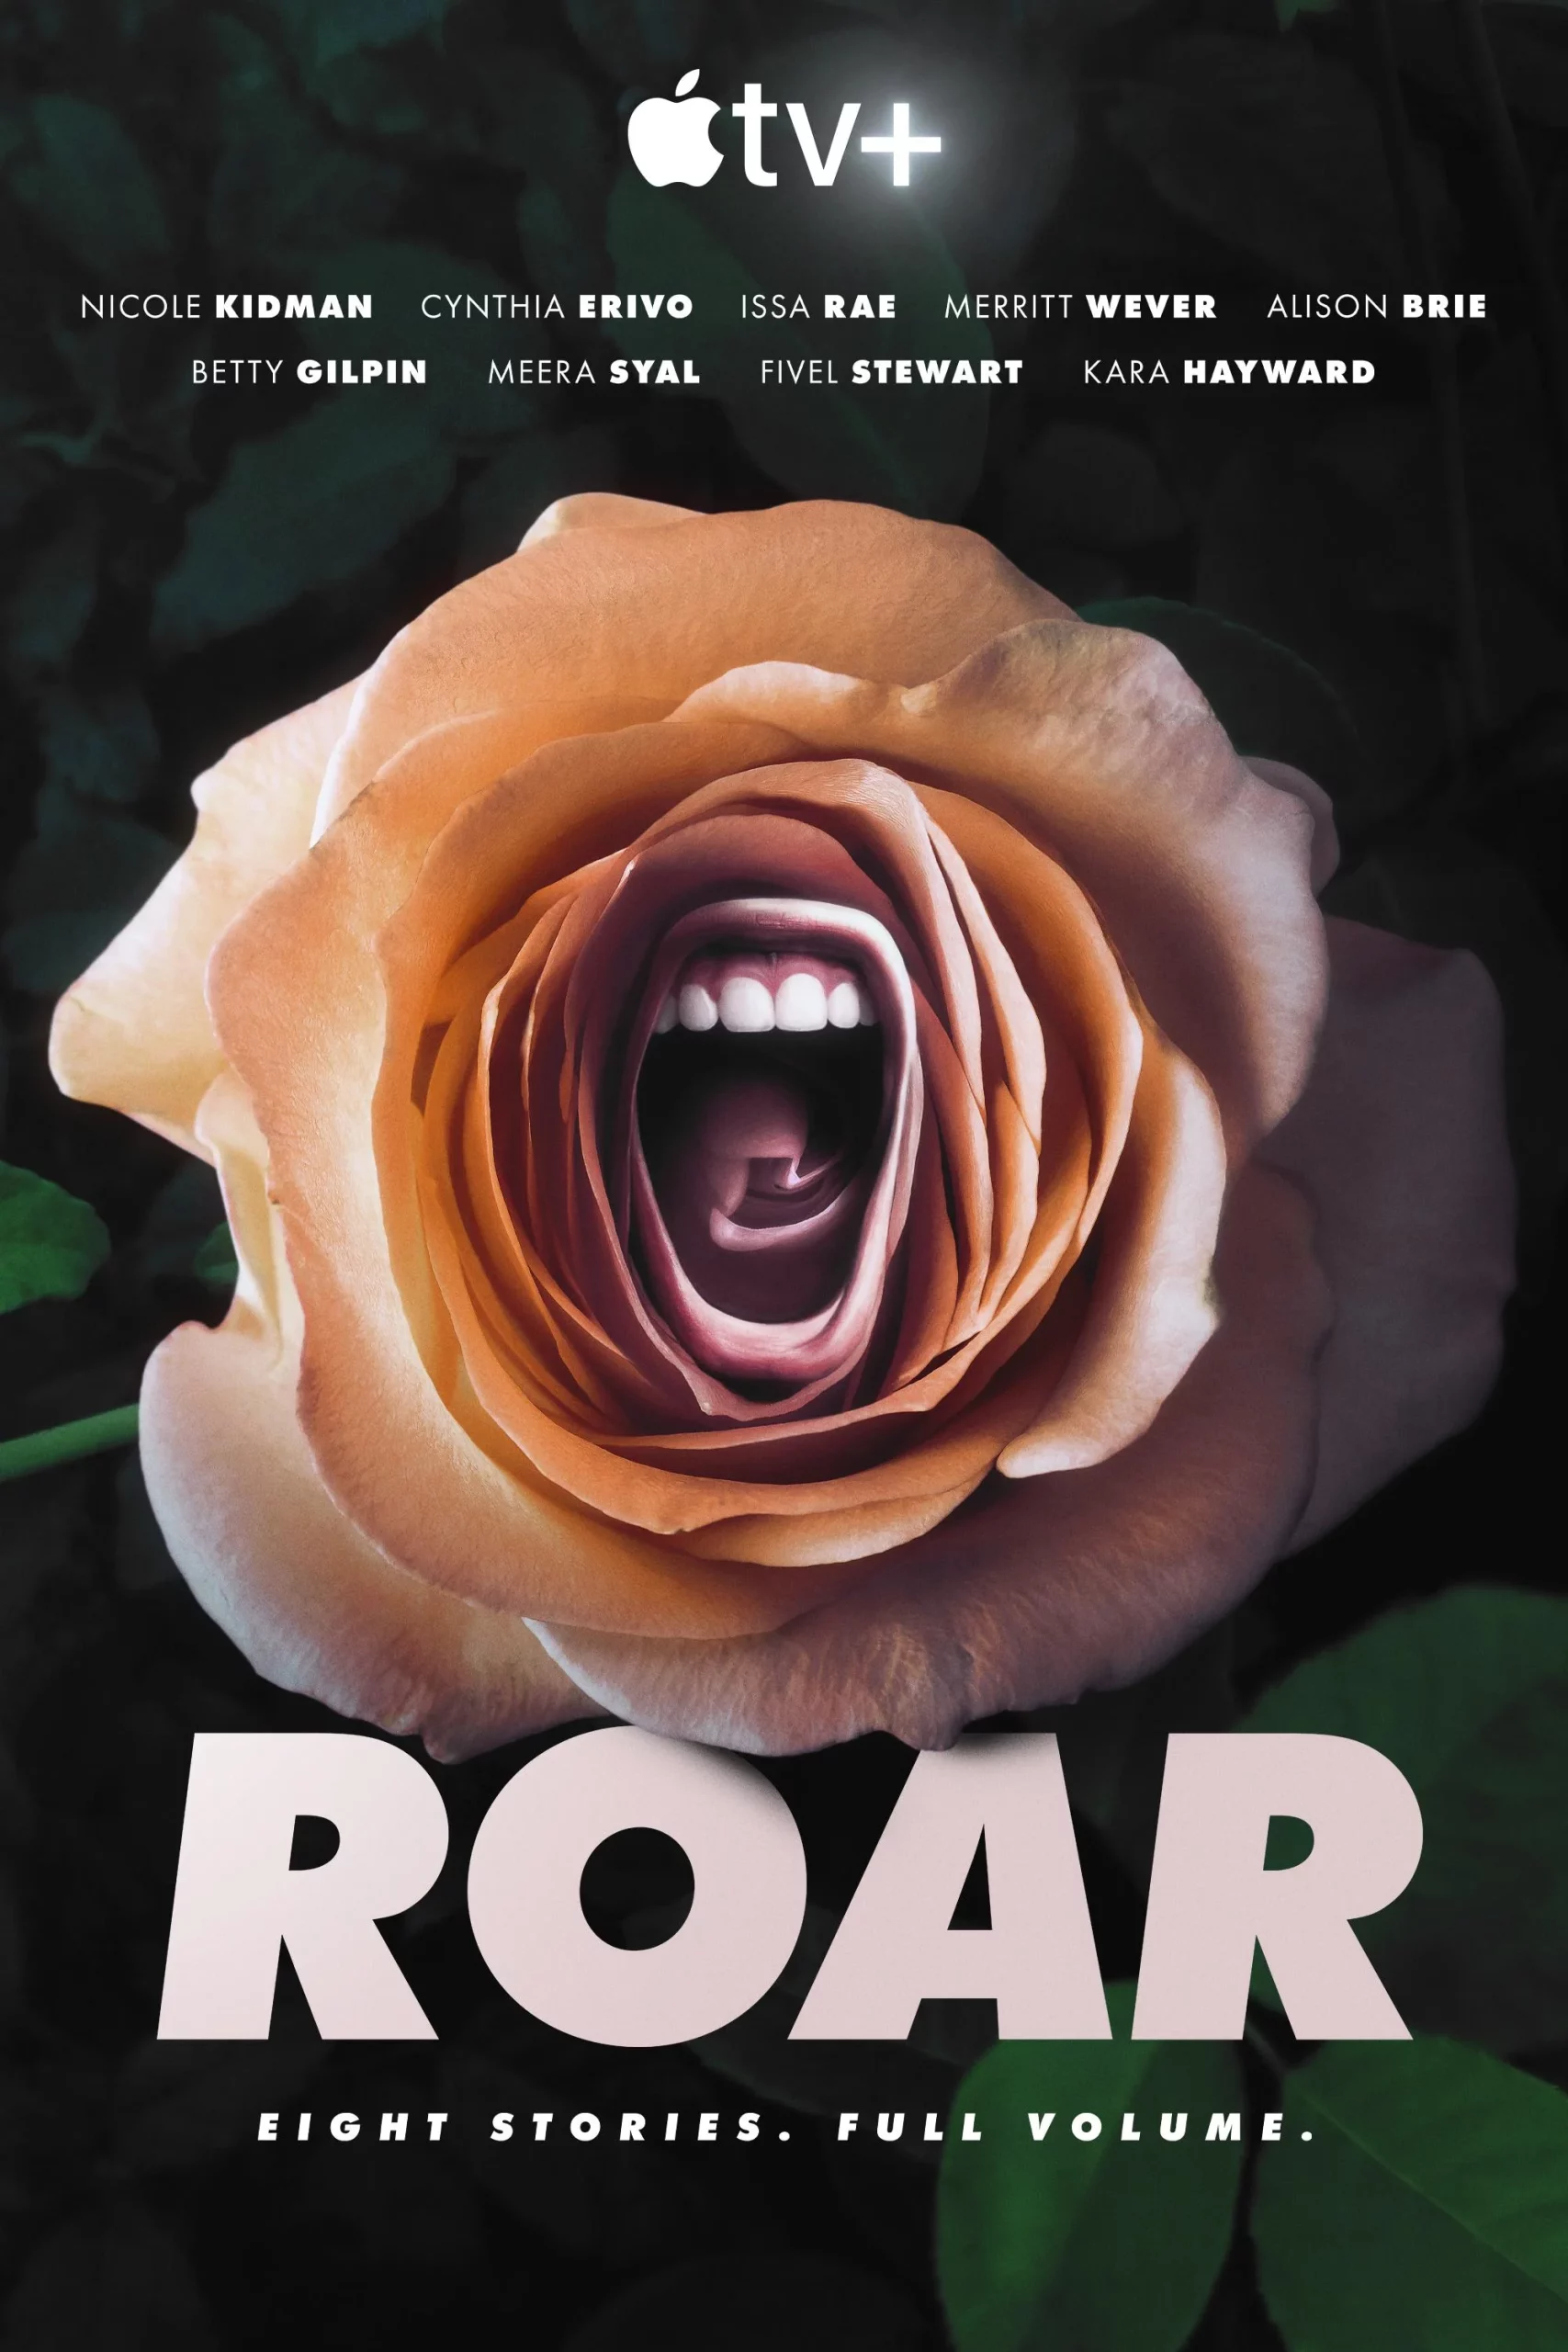 The theme anthology TV series "Roar‎" exposes Official Trailer, which will be launched on Apple TV+ on April 15